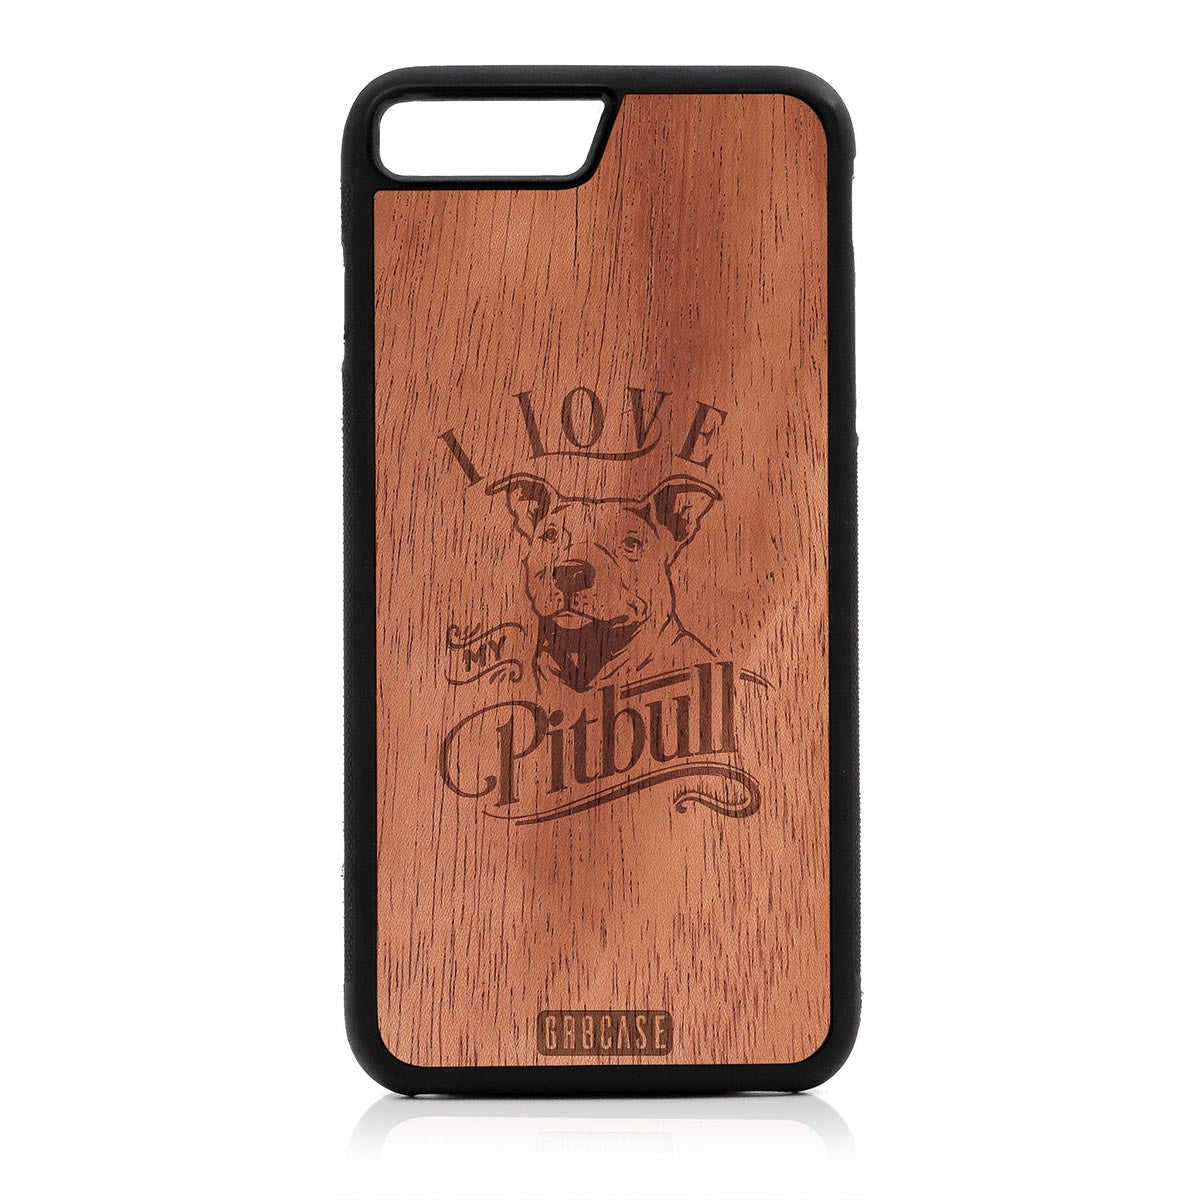 I Love My Pitbull Design Wood Case For iPhone 7 Plus / 8 Plus by GR8CASE